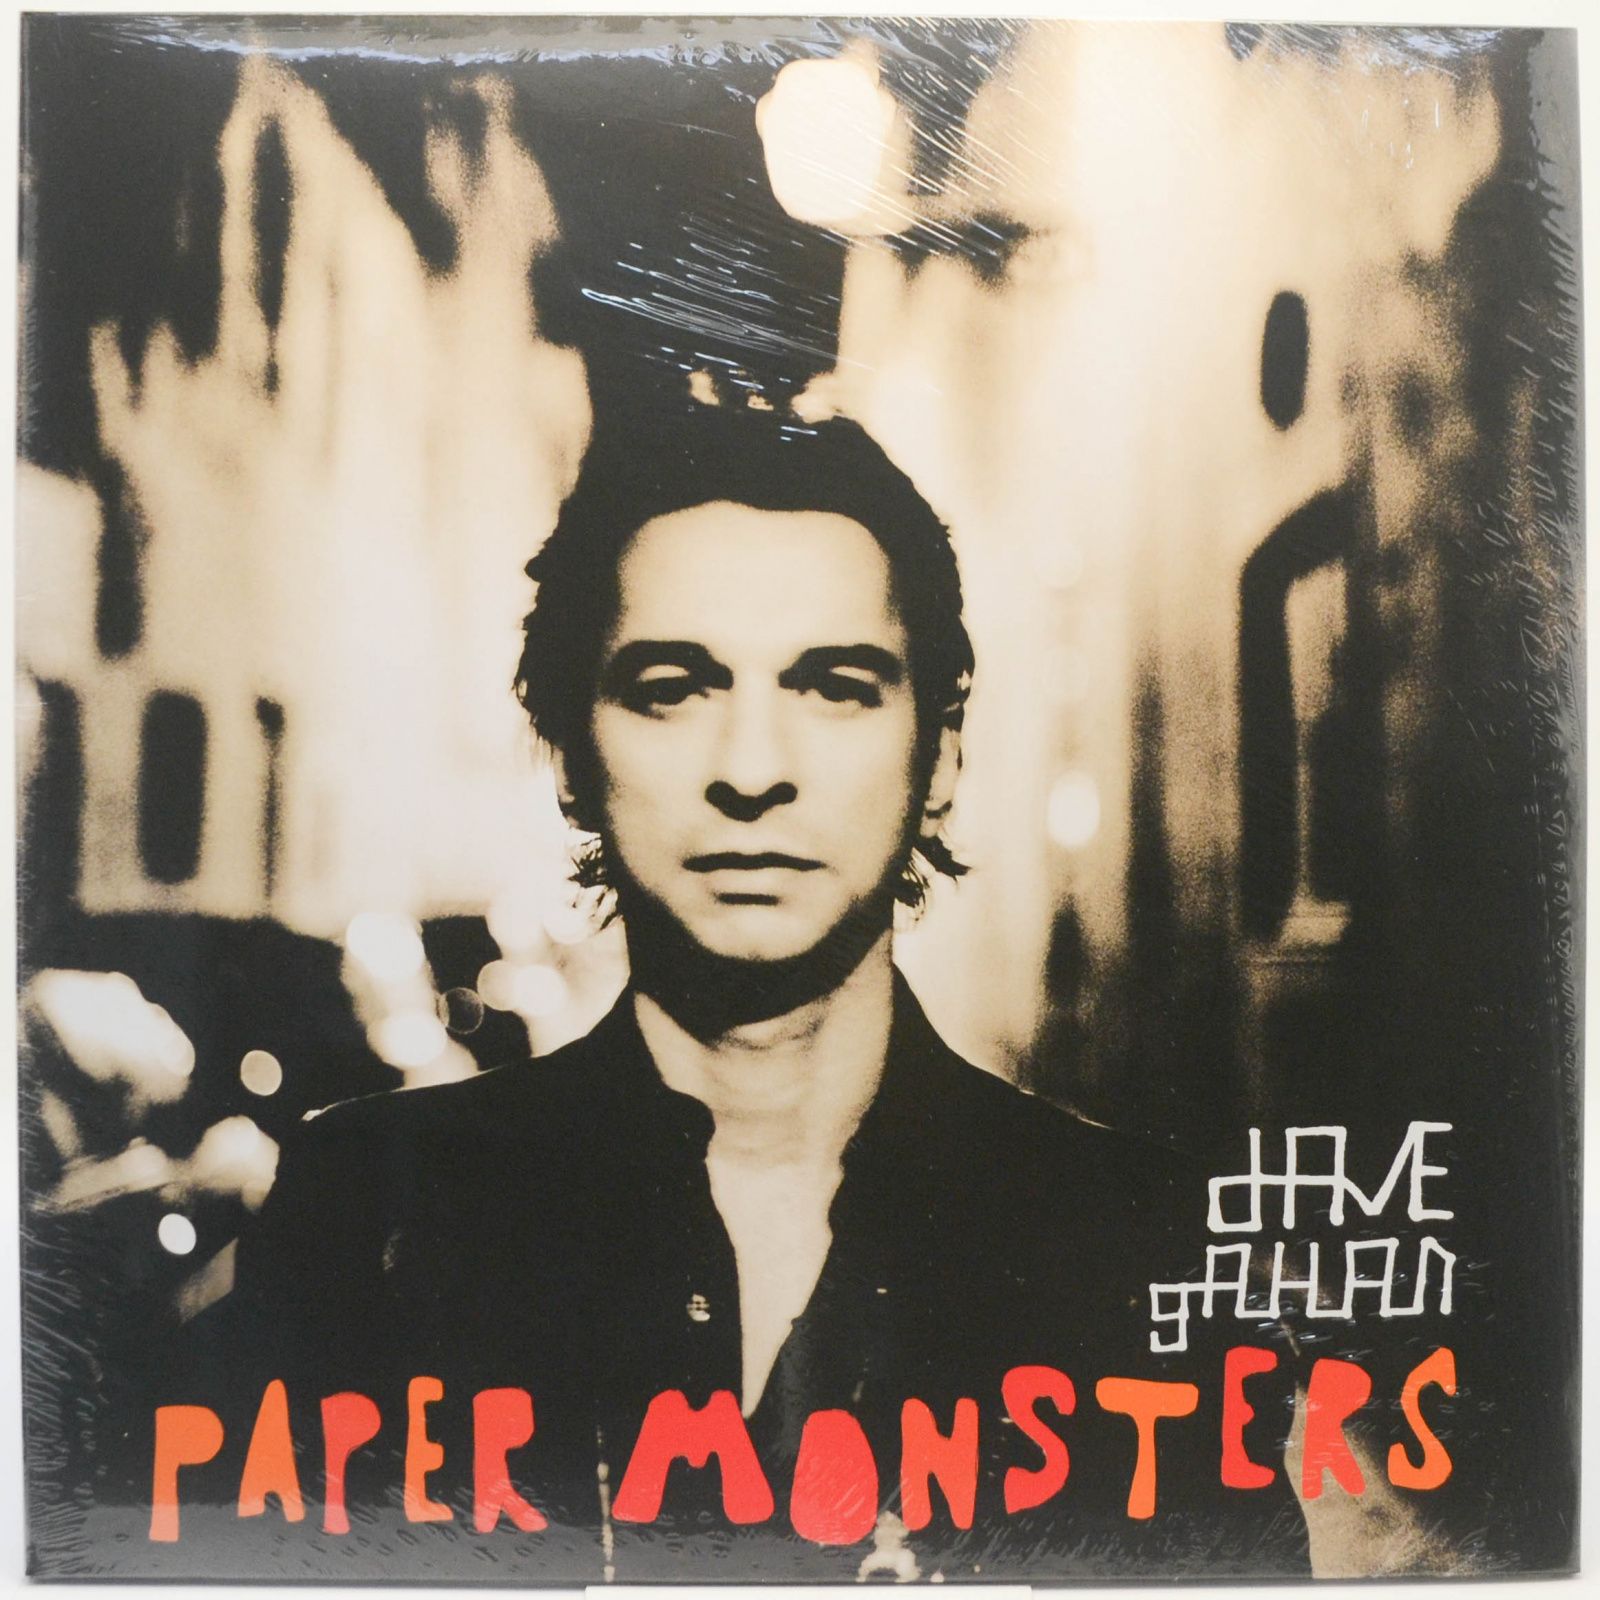 Paper Monsters, 2003